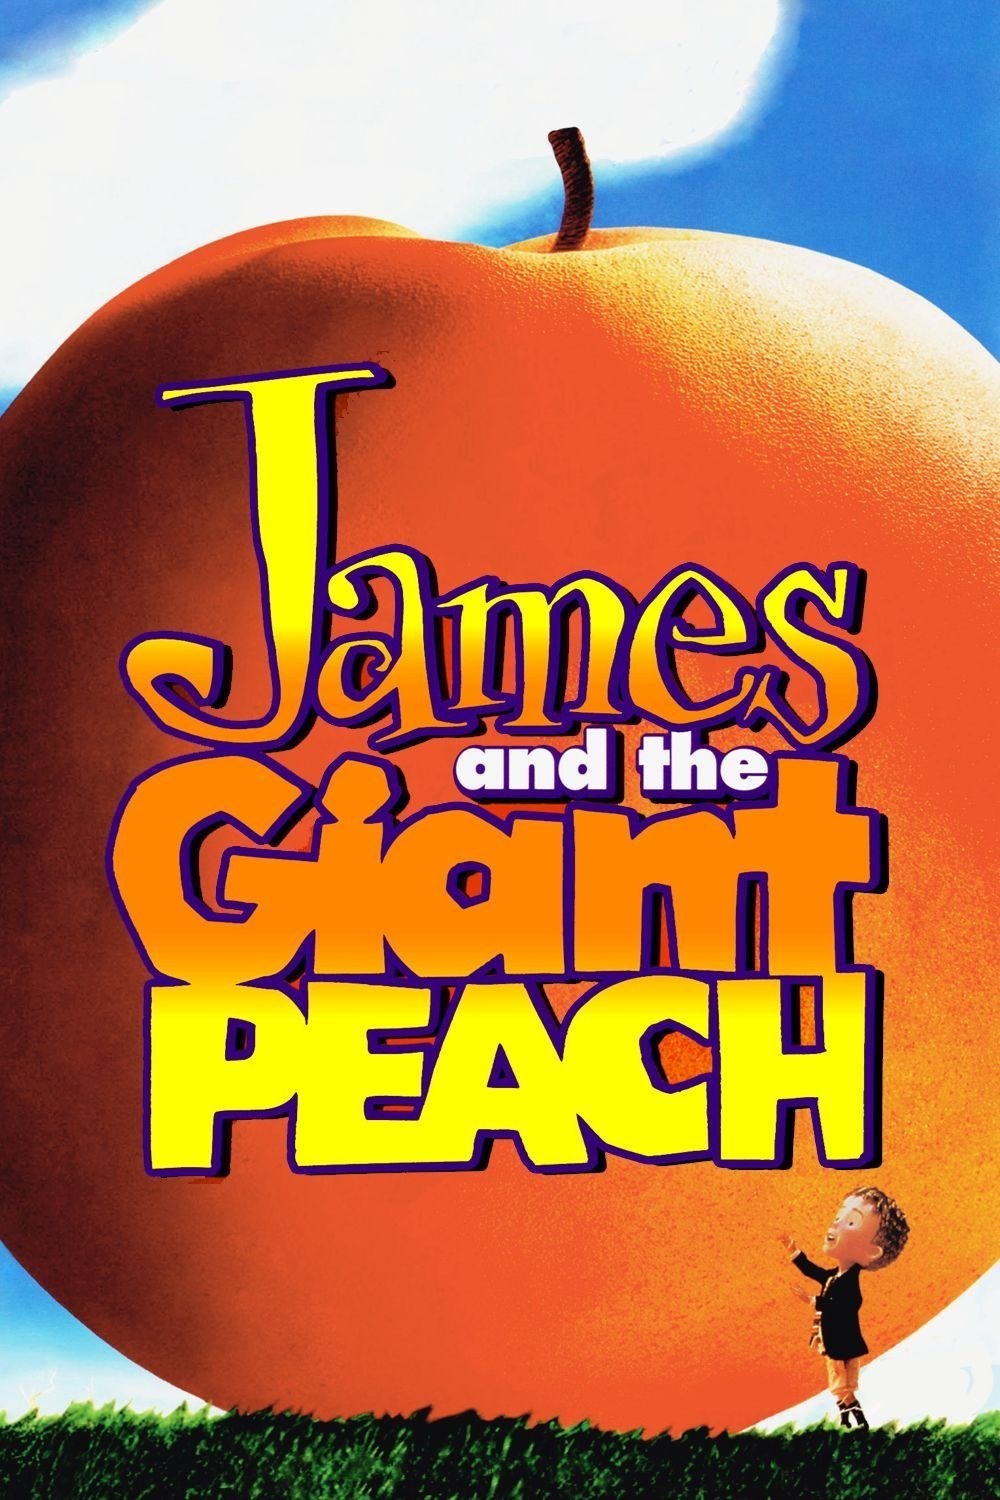 James And The Giant Peach Backgrounds, Compatible - PC, Mobile, Gadgets| 1000x1500 px